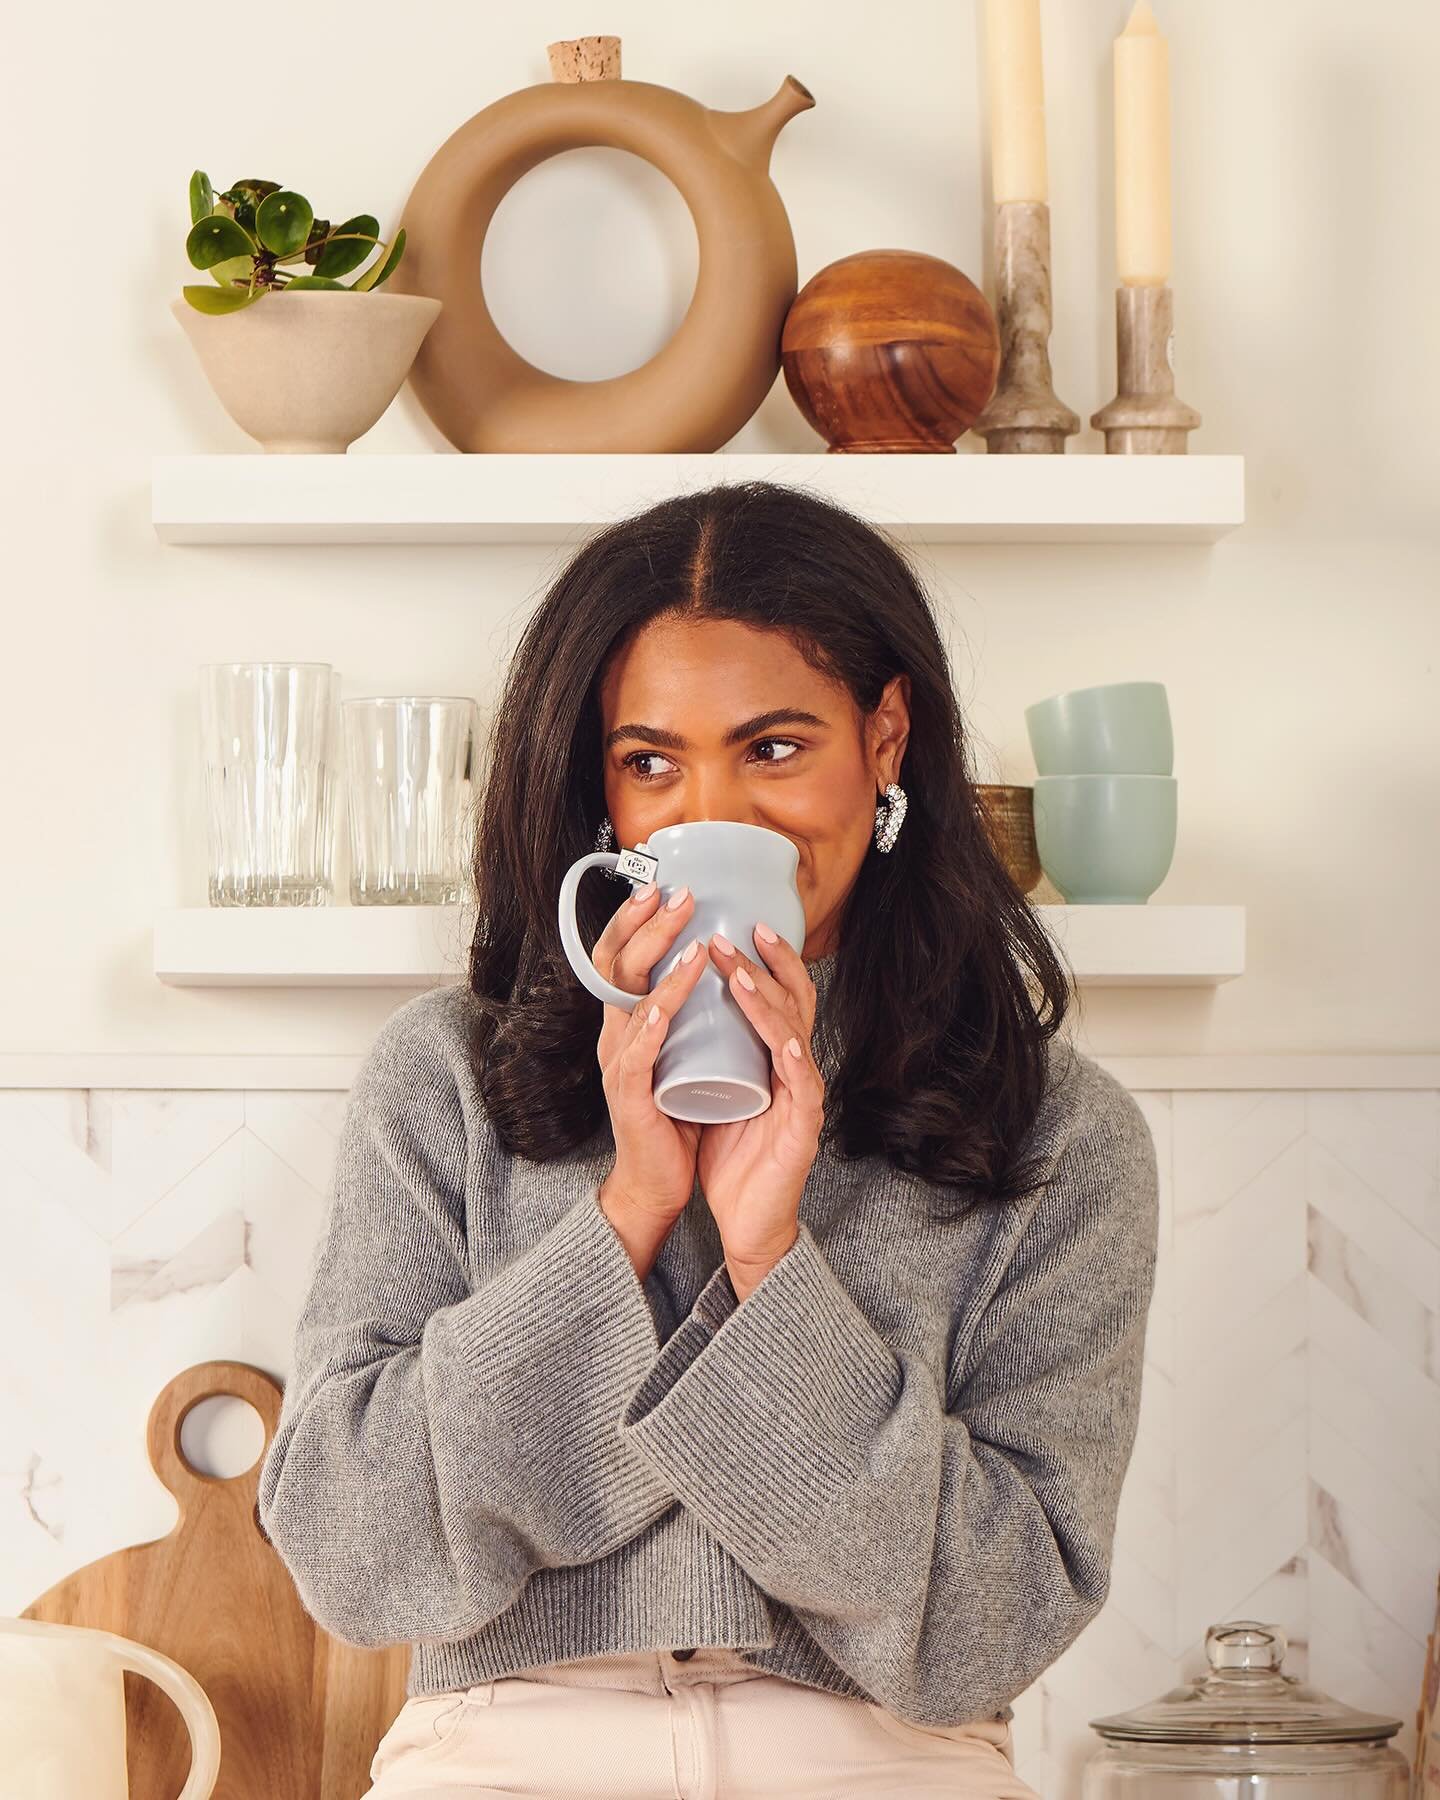 Start the week off right. Uplifting and productive are the vibes we are sending out! ☕️✨

Beautiful shoot with @theteaspot and @facteurpr 
Model @alex_gaines